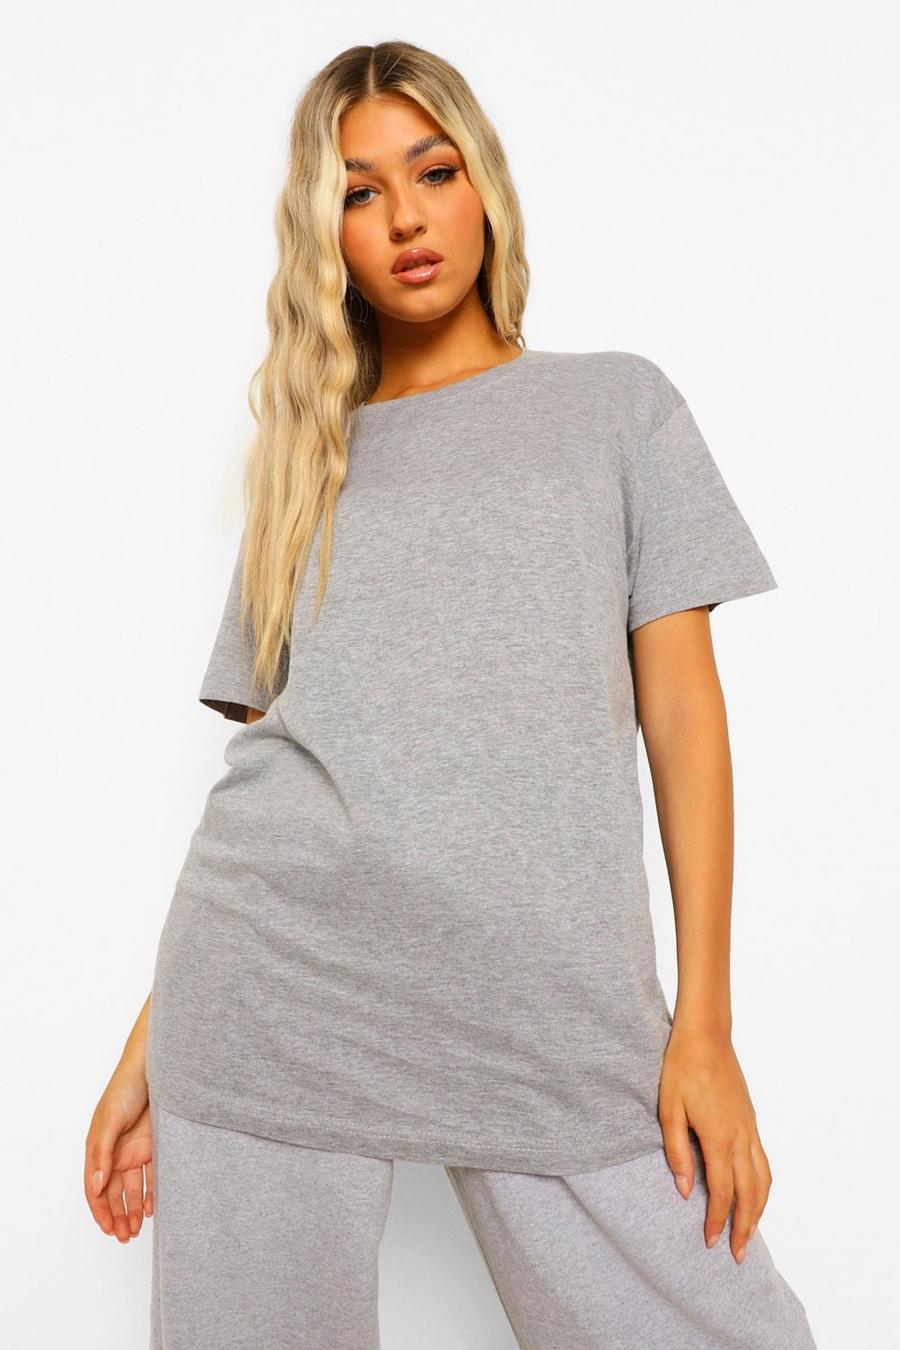 Charcoal grey Tall Basic Plain Cotton T-Shirt image number 1